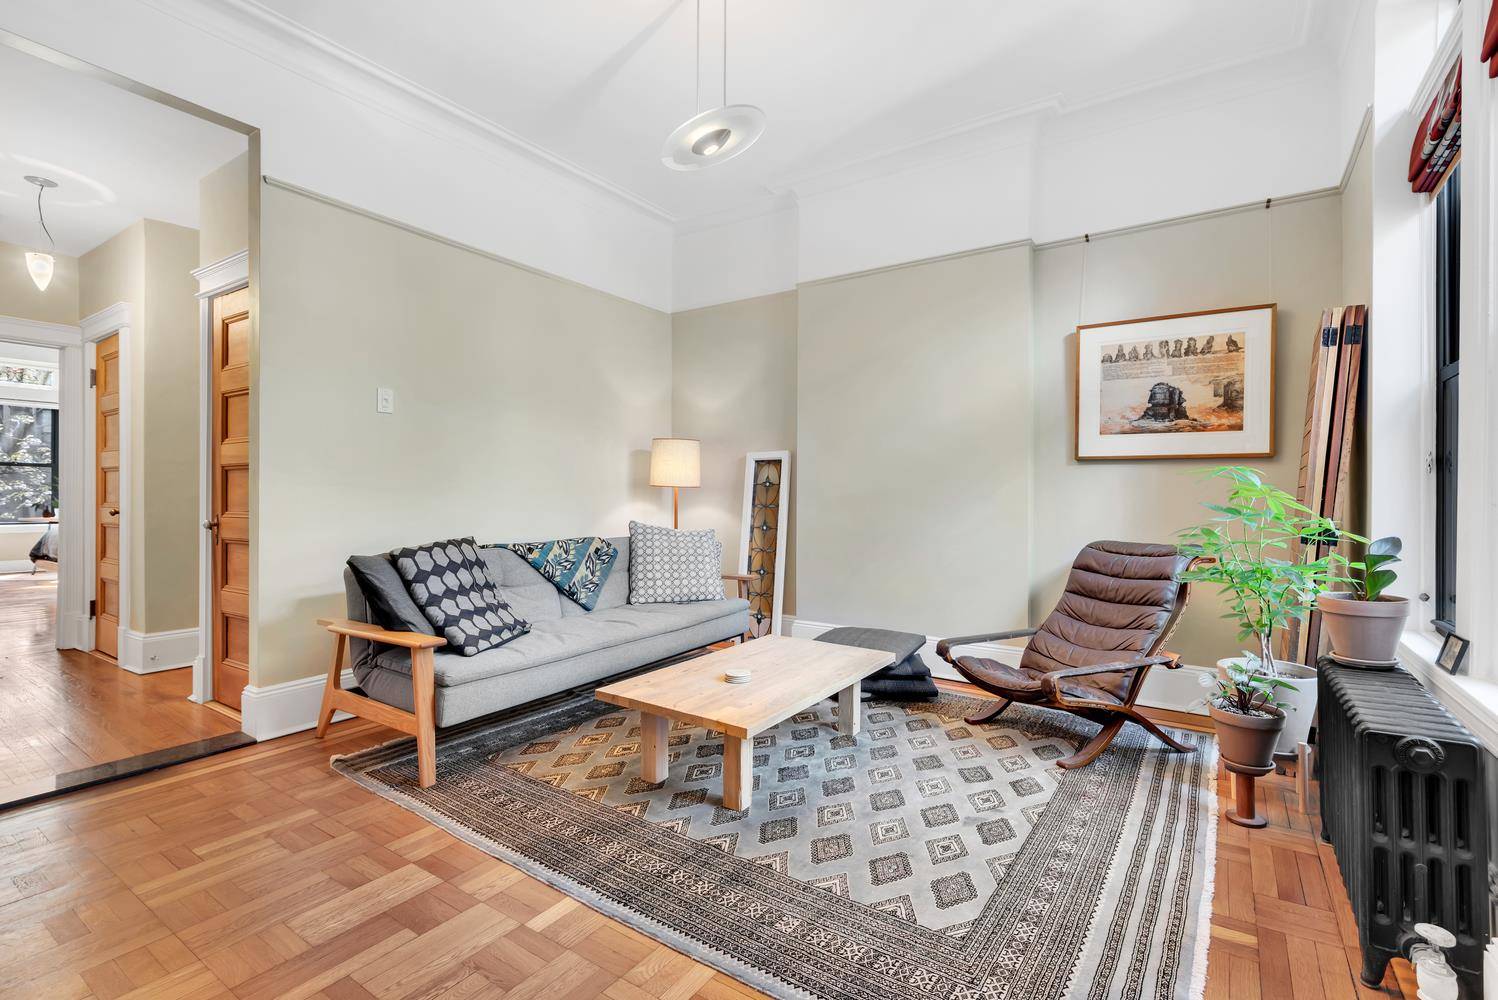 Presenting an exceptionally elegant one bedroom parlor apartment in a stunning 1920 built limestone townhouse, converted to four exclusive condominiums.